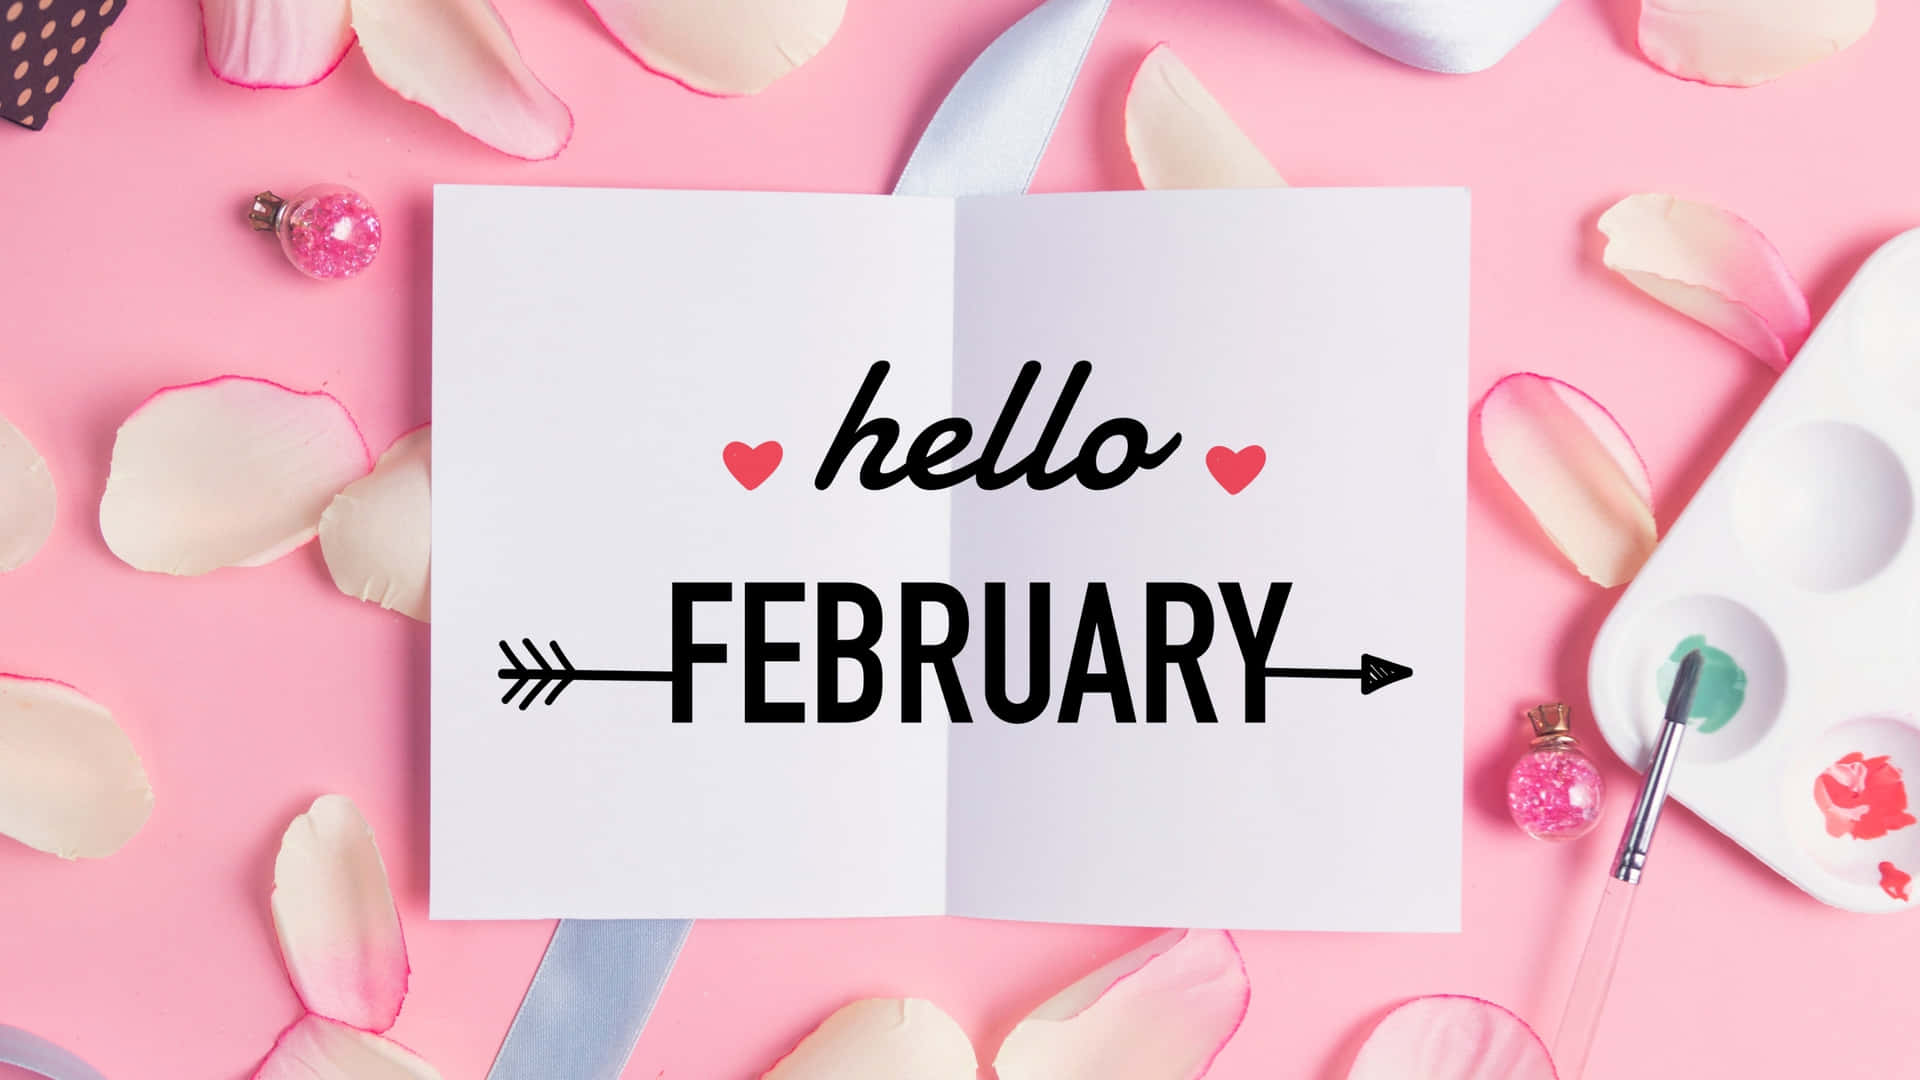 Hello February Greeting Card Pink Background Wallpaper